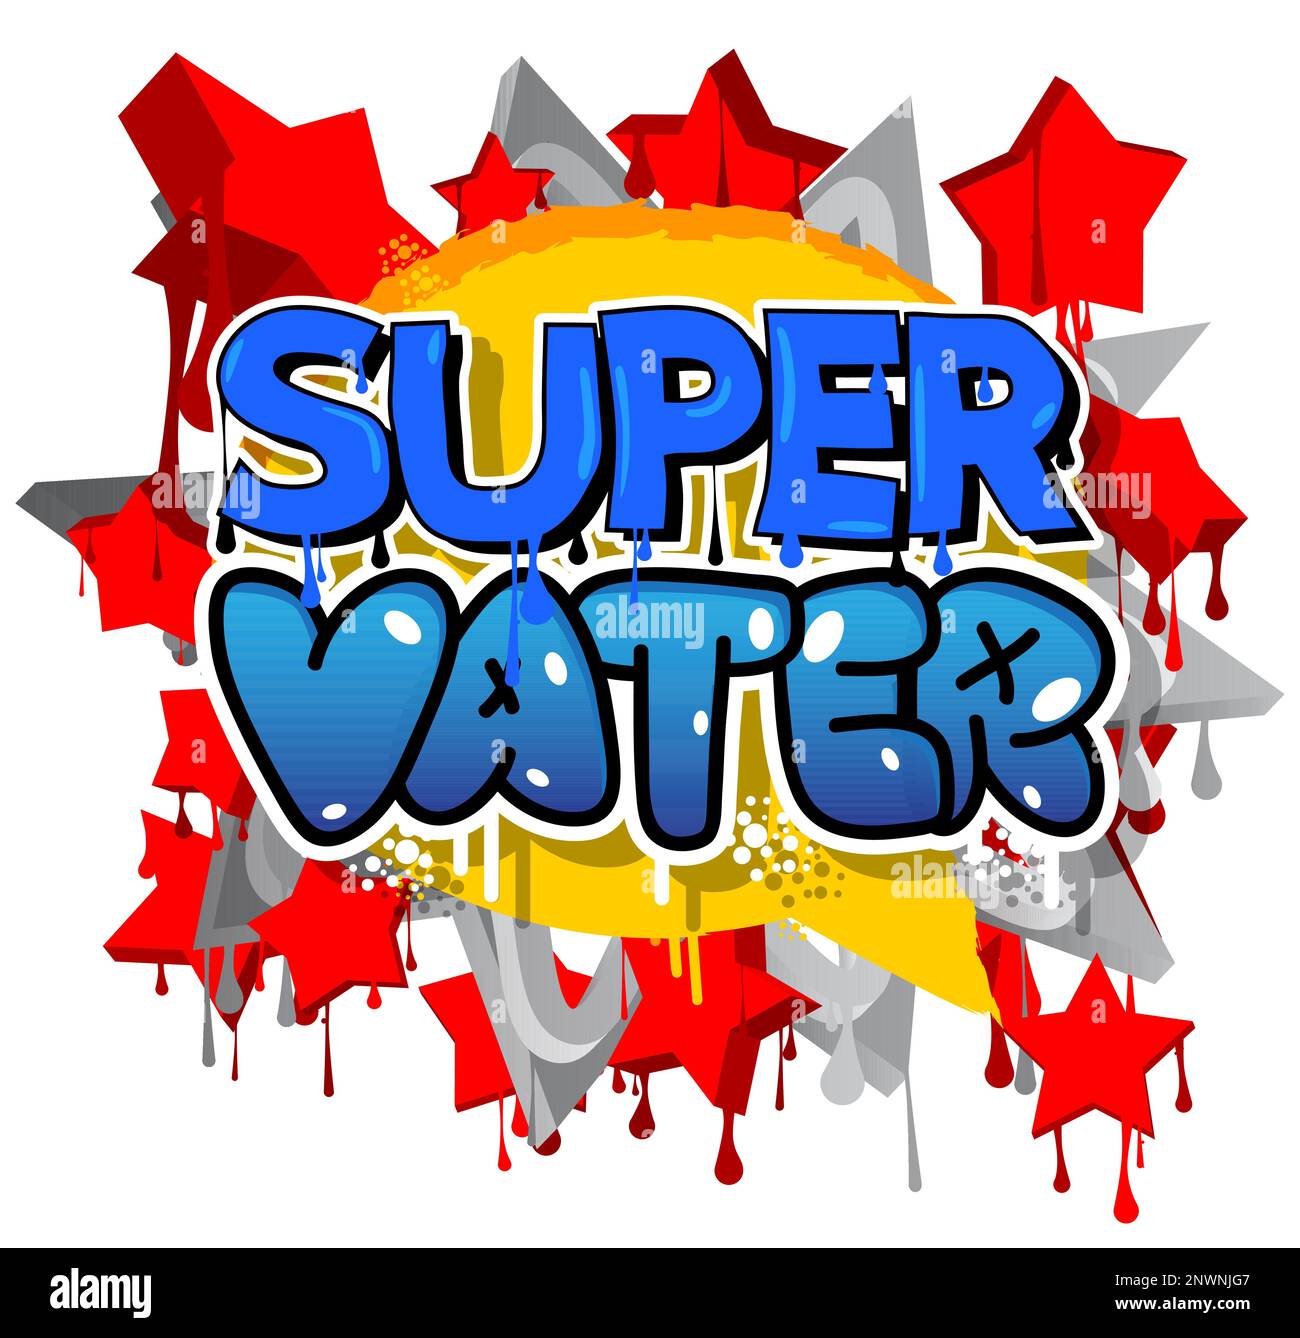 German words for Super Vater means Super Father. Graffiti tag. Abstract modern street art decoration performed in urban painting style. Stock Vector